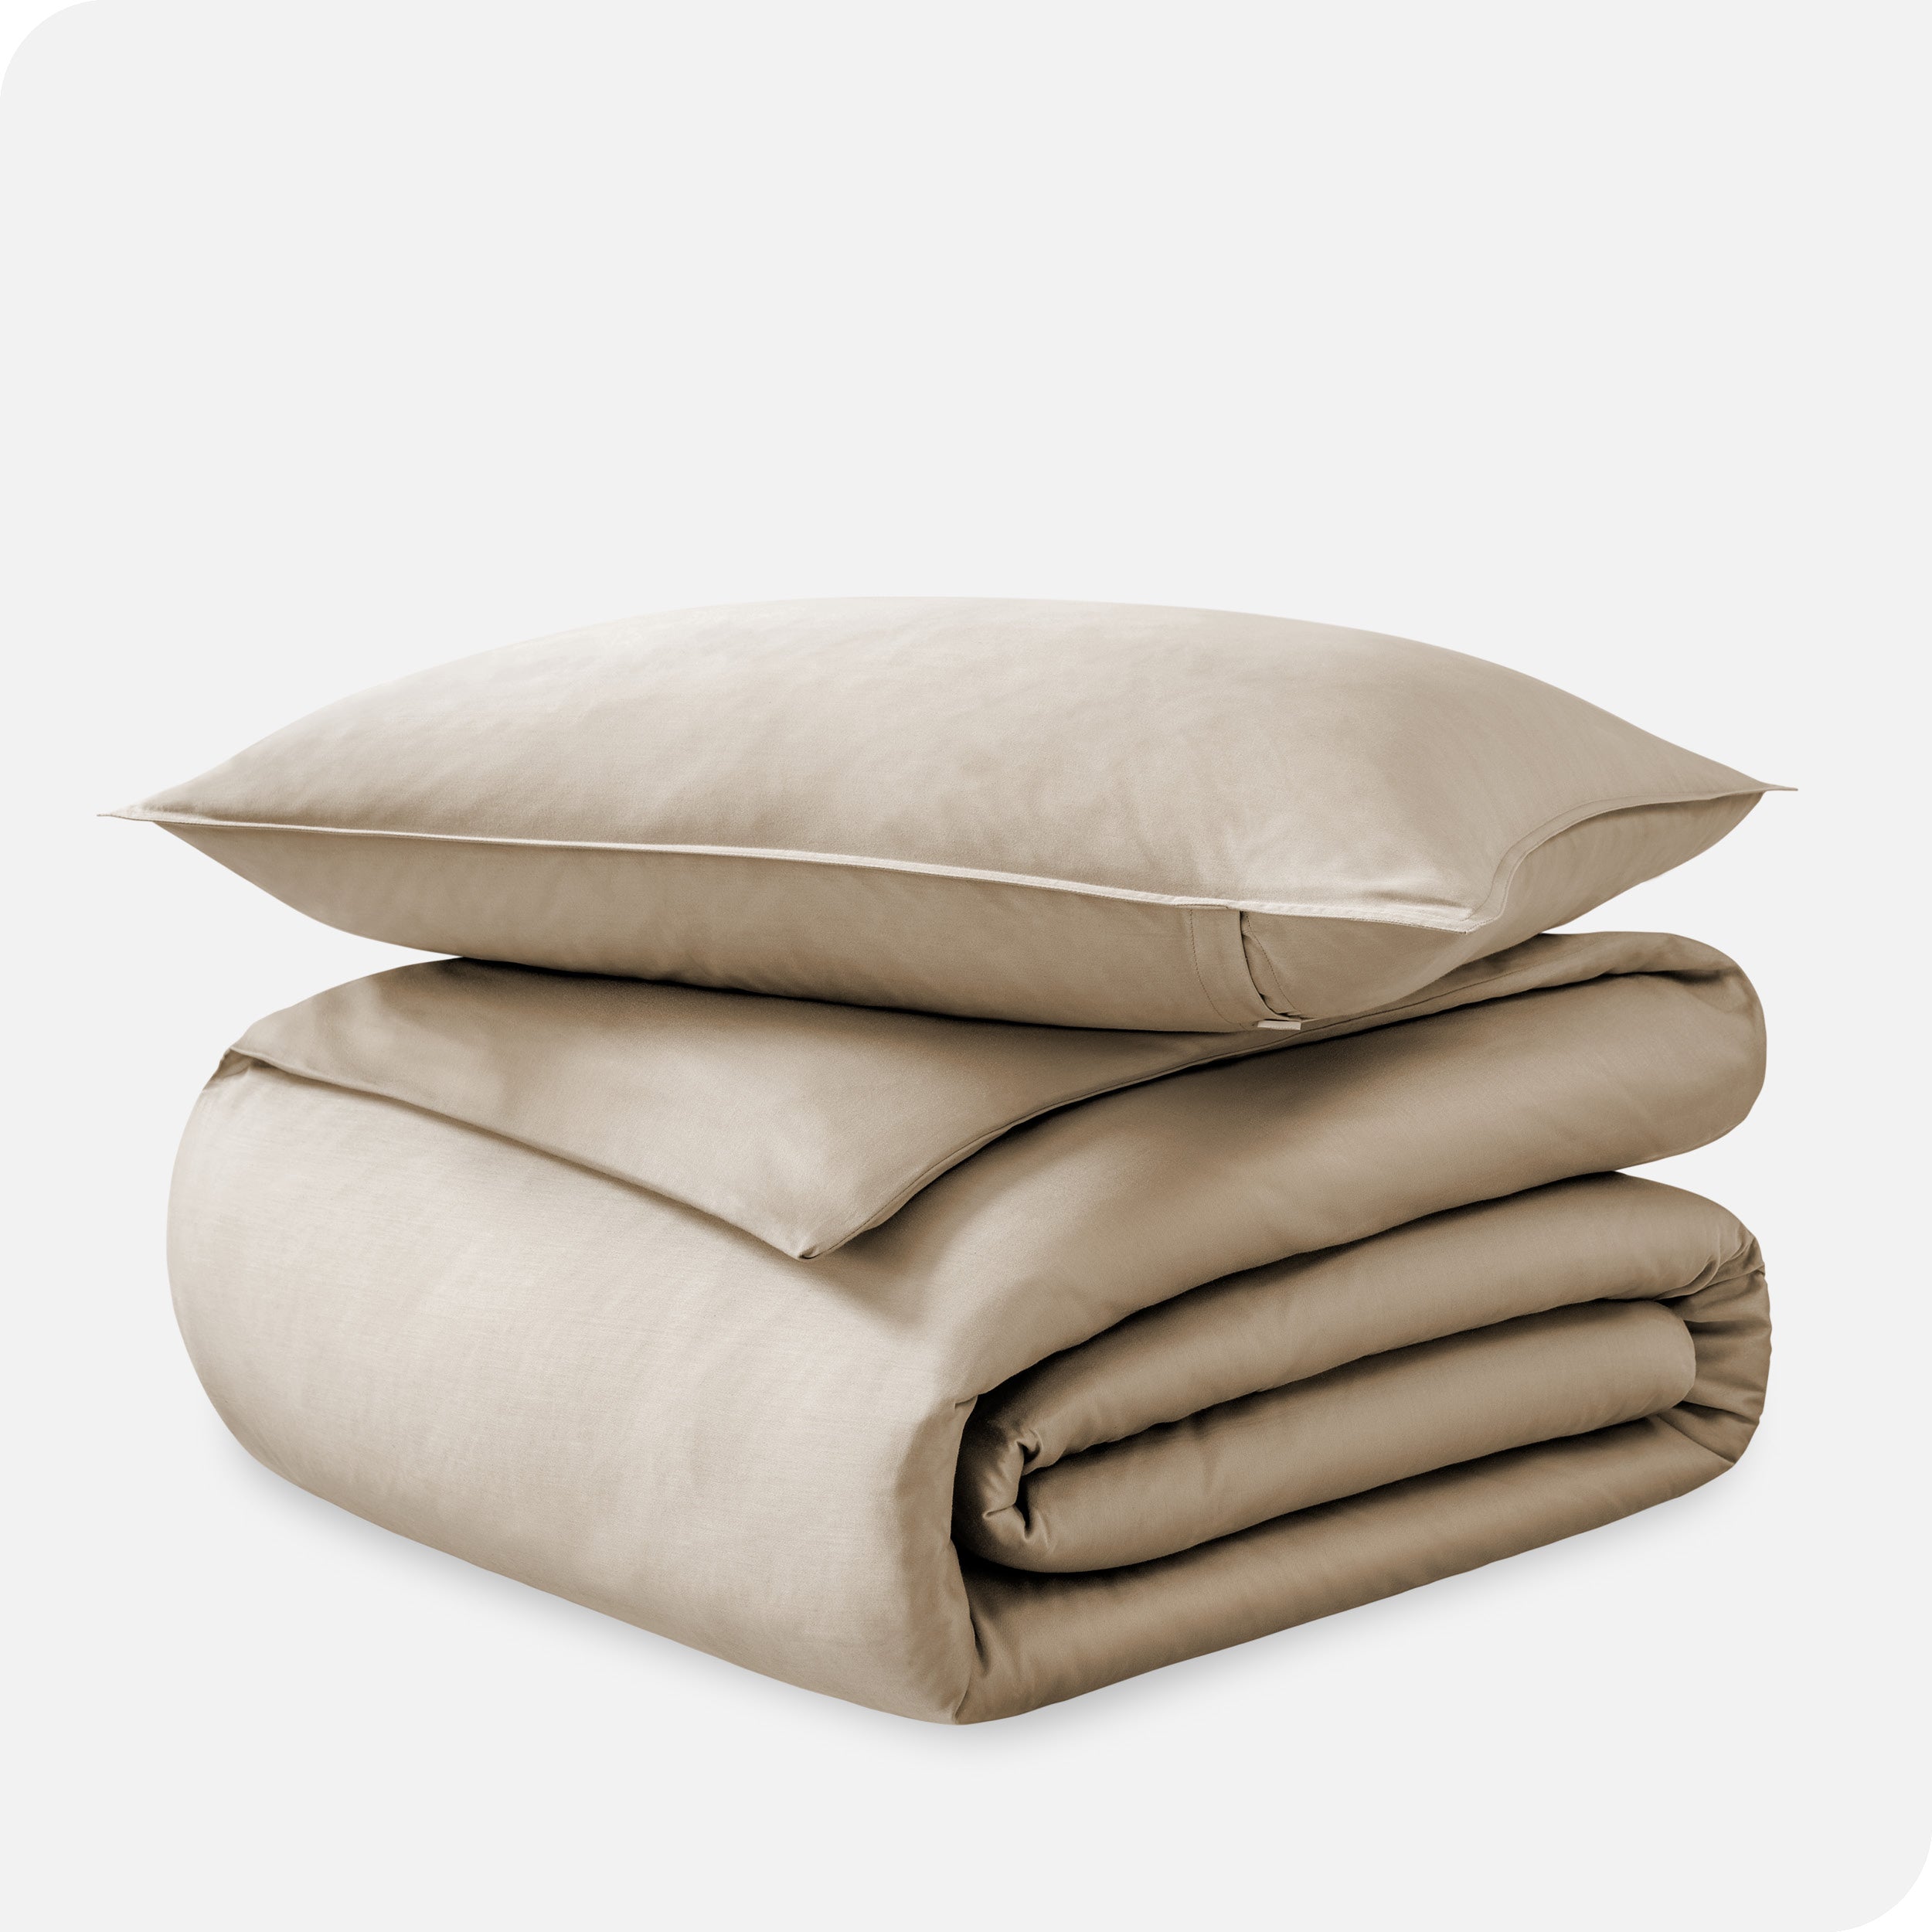 A folded organic sateen duvet cover with a pillow on top.